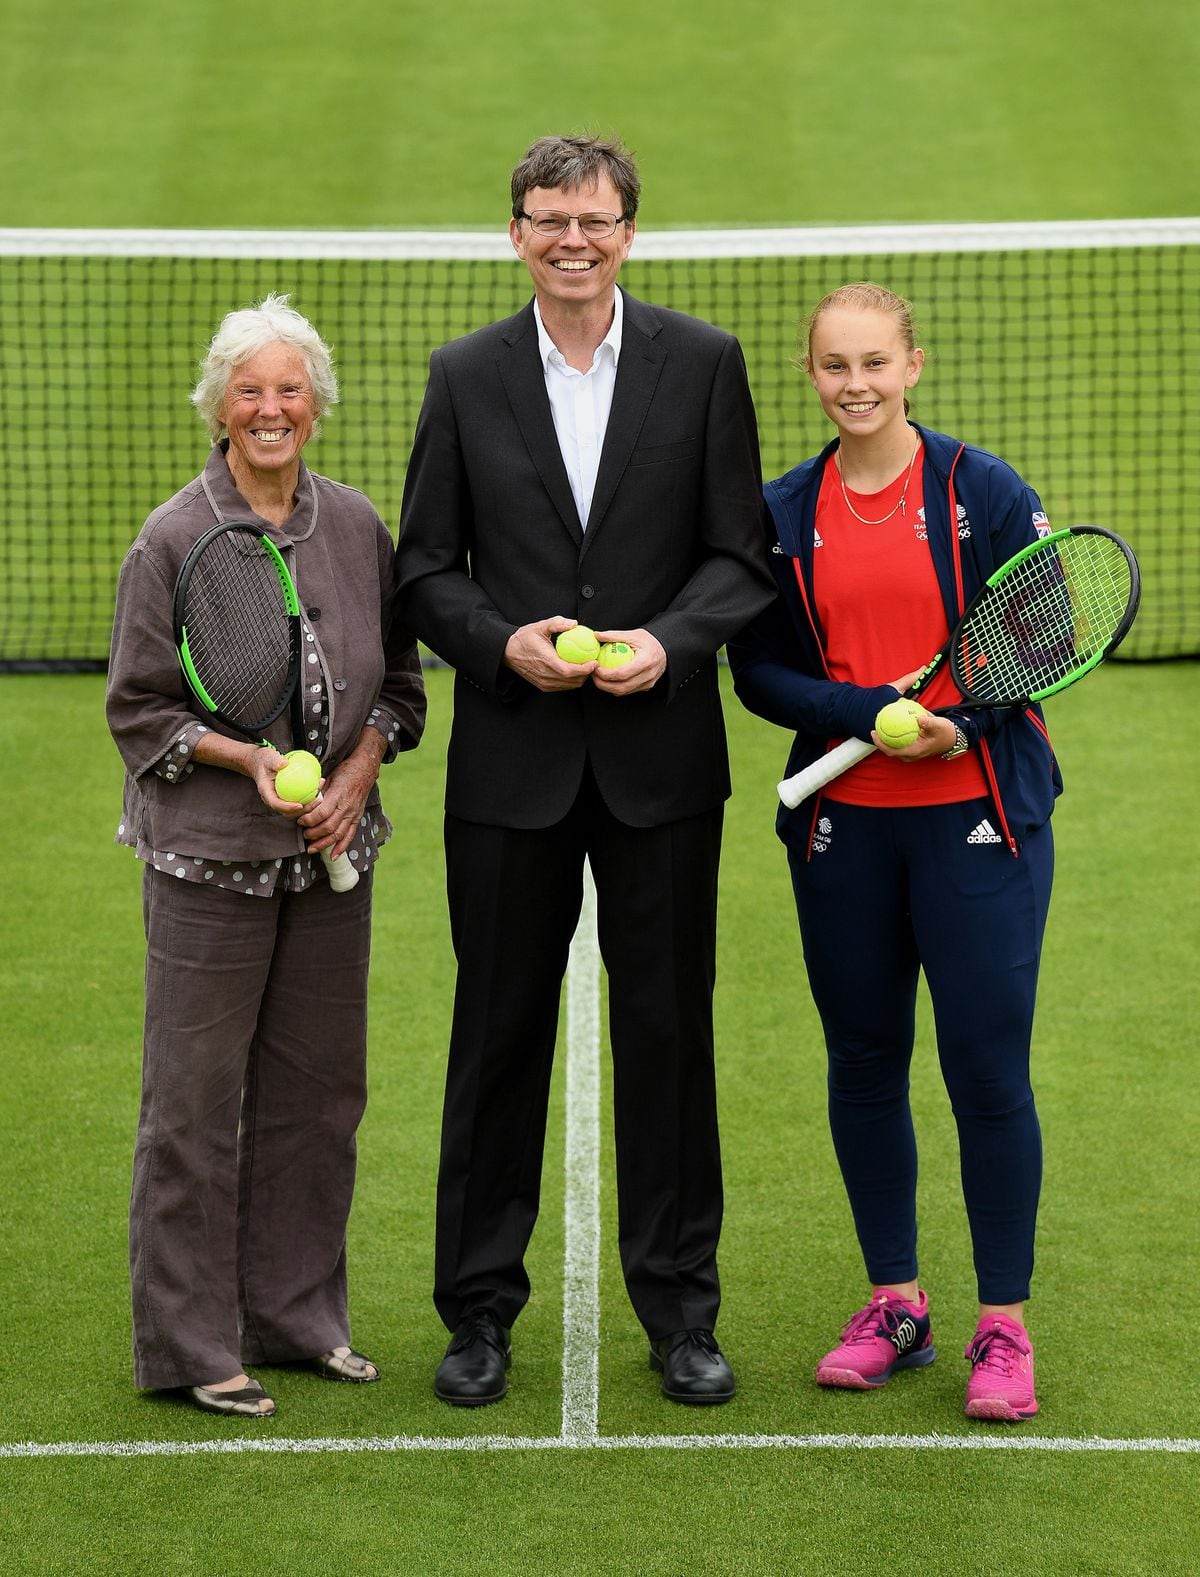 Tennis great Ann Jones, tournament director Patrick Hughesman and under-18 national champion Lillian Mould at Edgbaston Priory Club marking one month to go until the Nature Valley Classic Birmingham